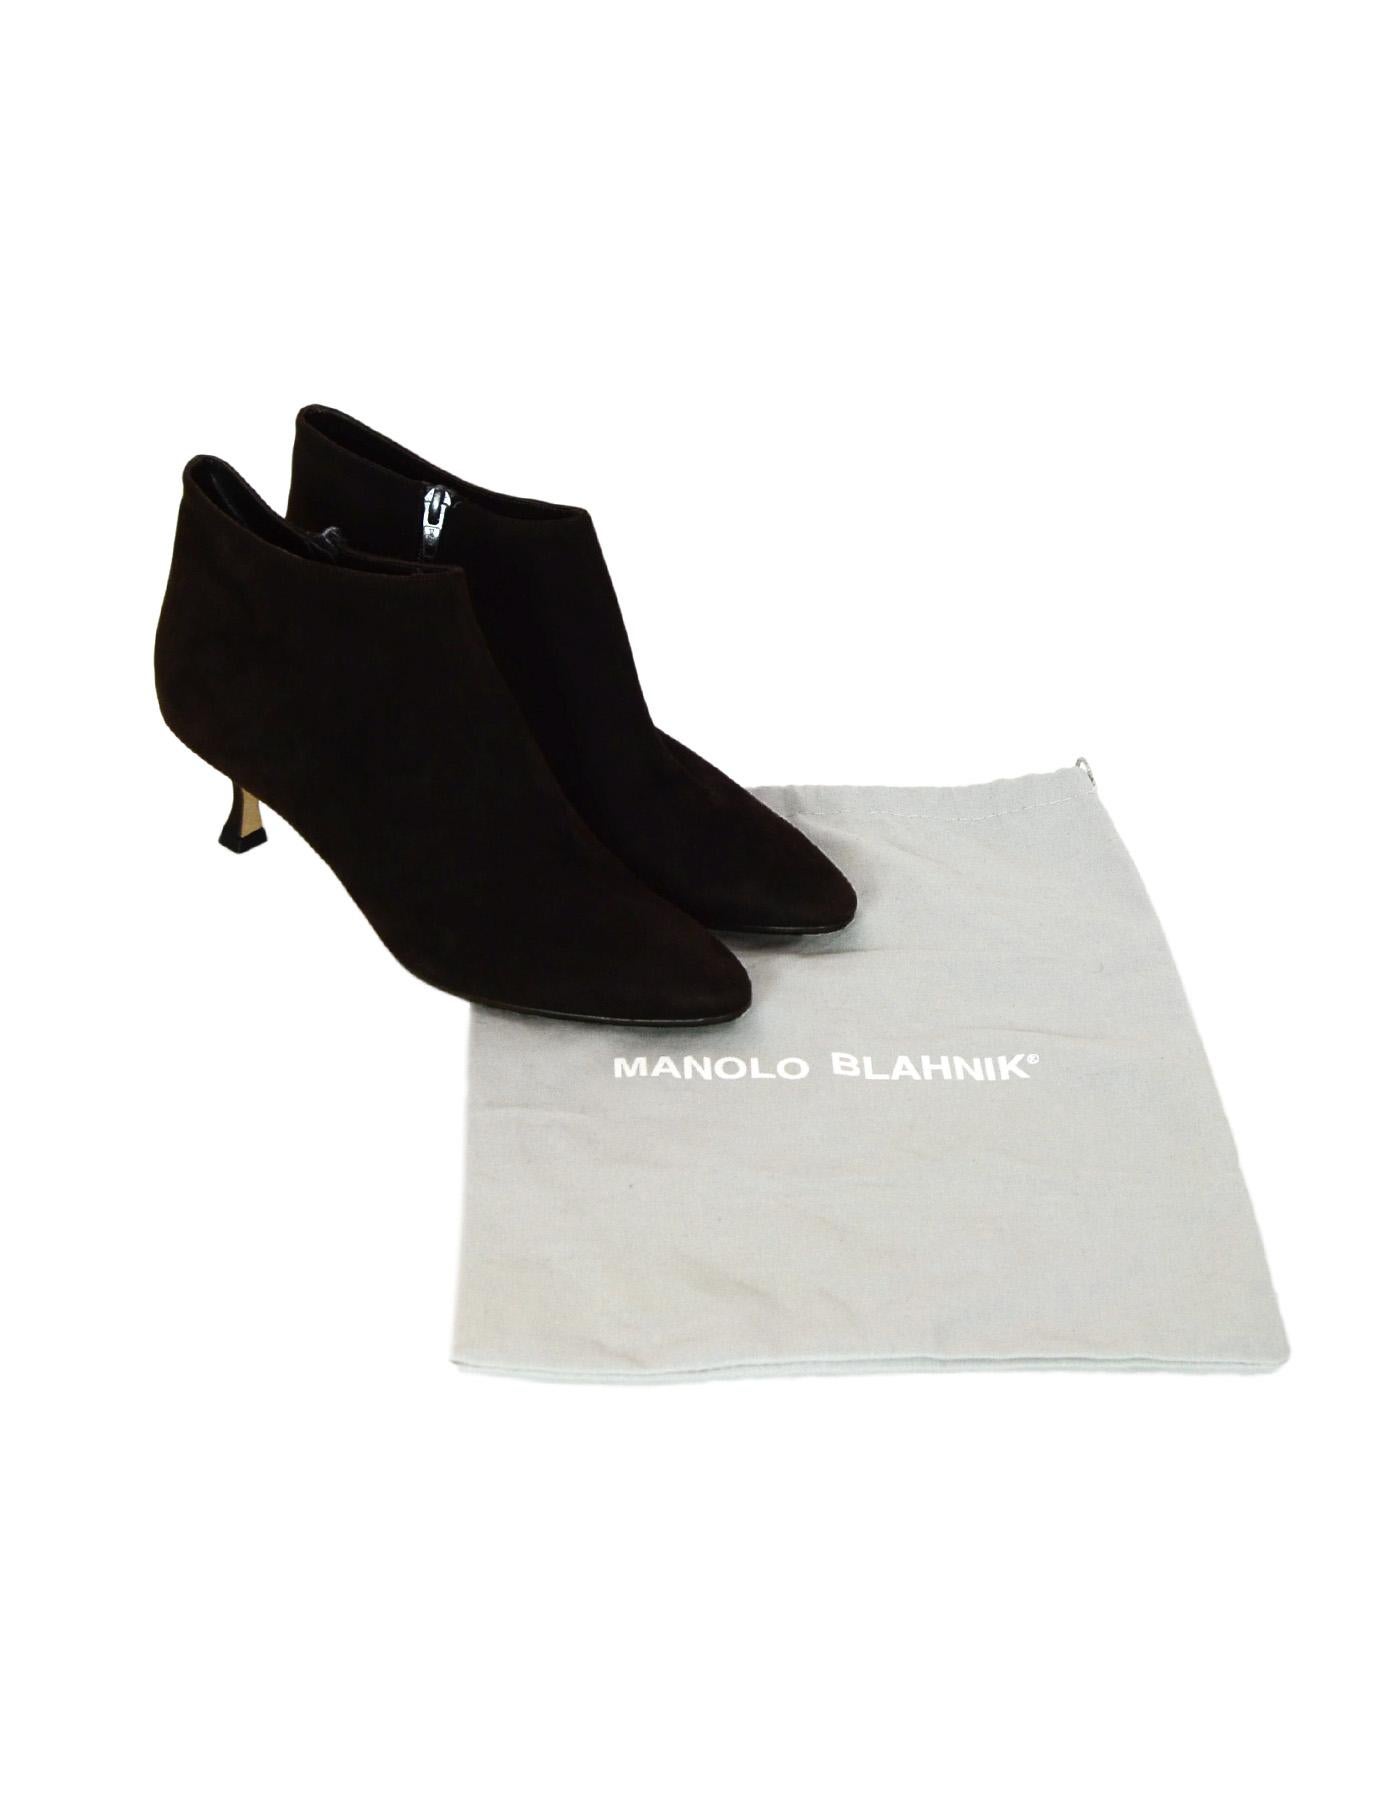 Manolo Blahnik Brown Suede Heeled Ankle Booties Sz 39.5

Color: Brown
Hardware: Browntone
Materials: Suede
Closure/Opening: Zipper side
Overall Condition: New condition, no wear on soles
Includes:  Dust bag

Measurements: 
Marked Size: 39.5
Heel